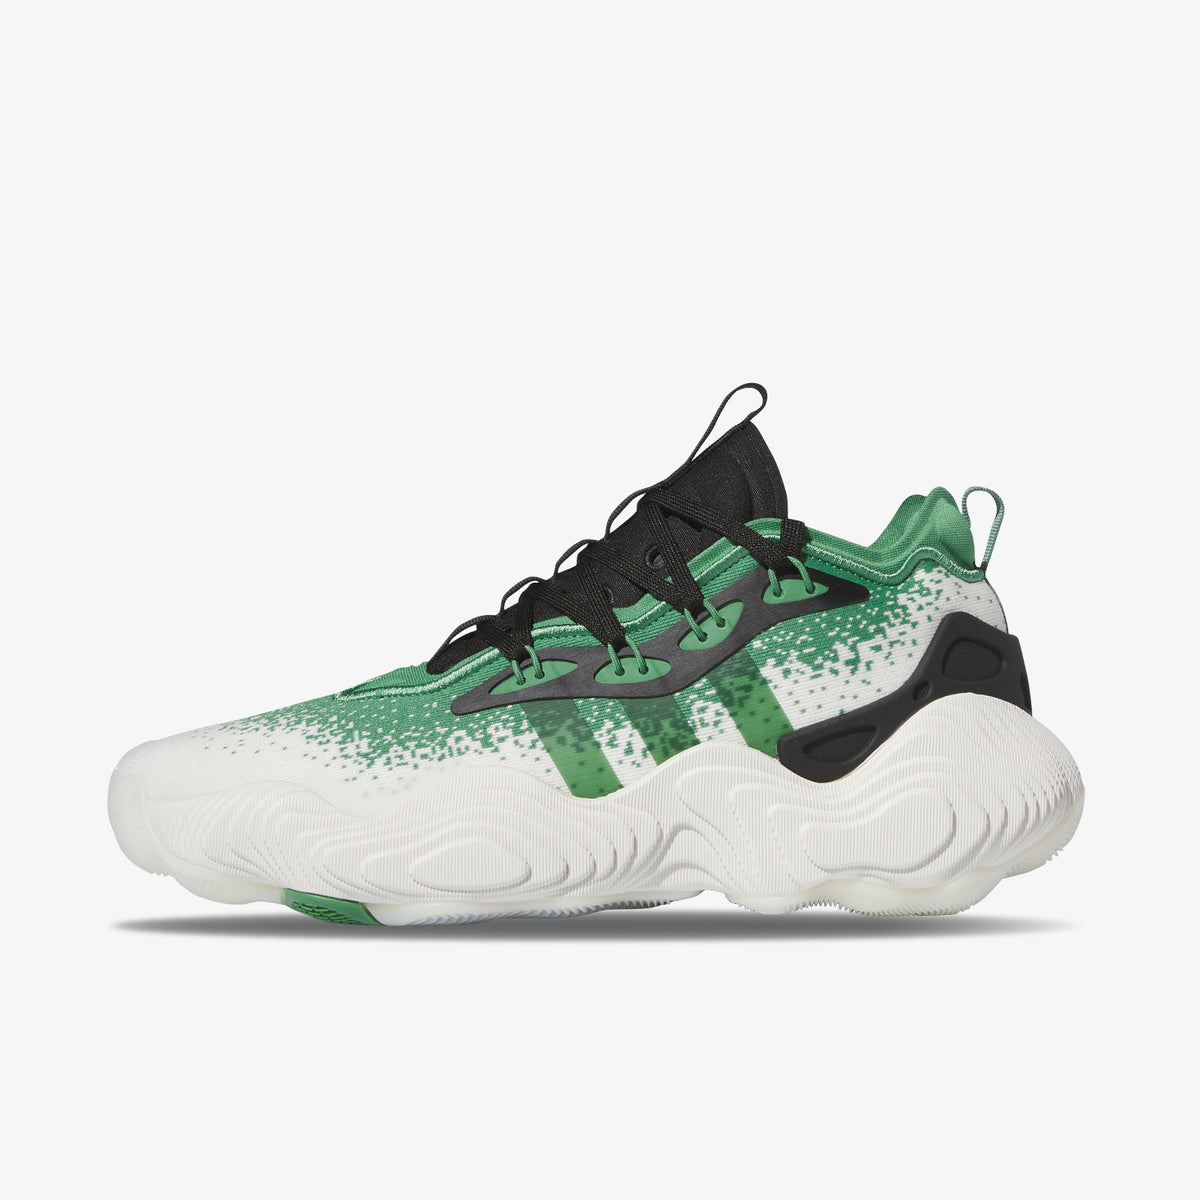 Trae Young 3 - Green/White